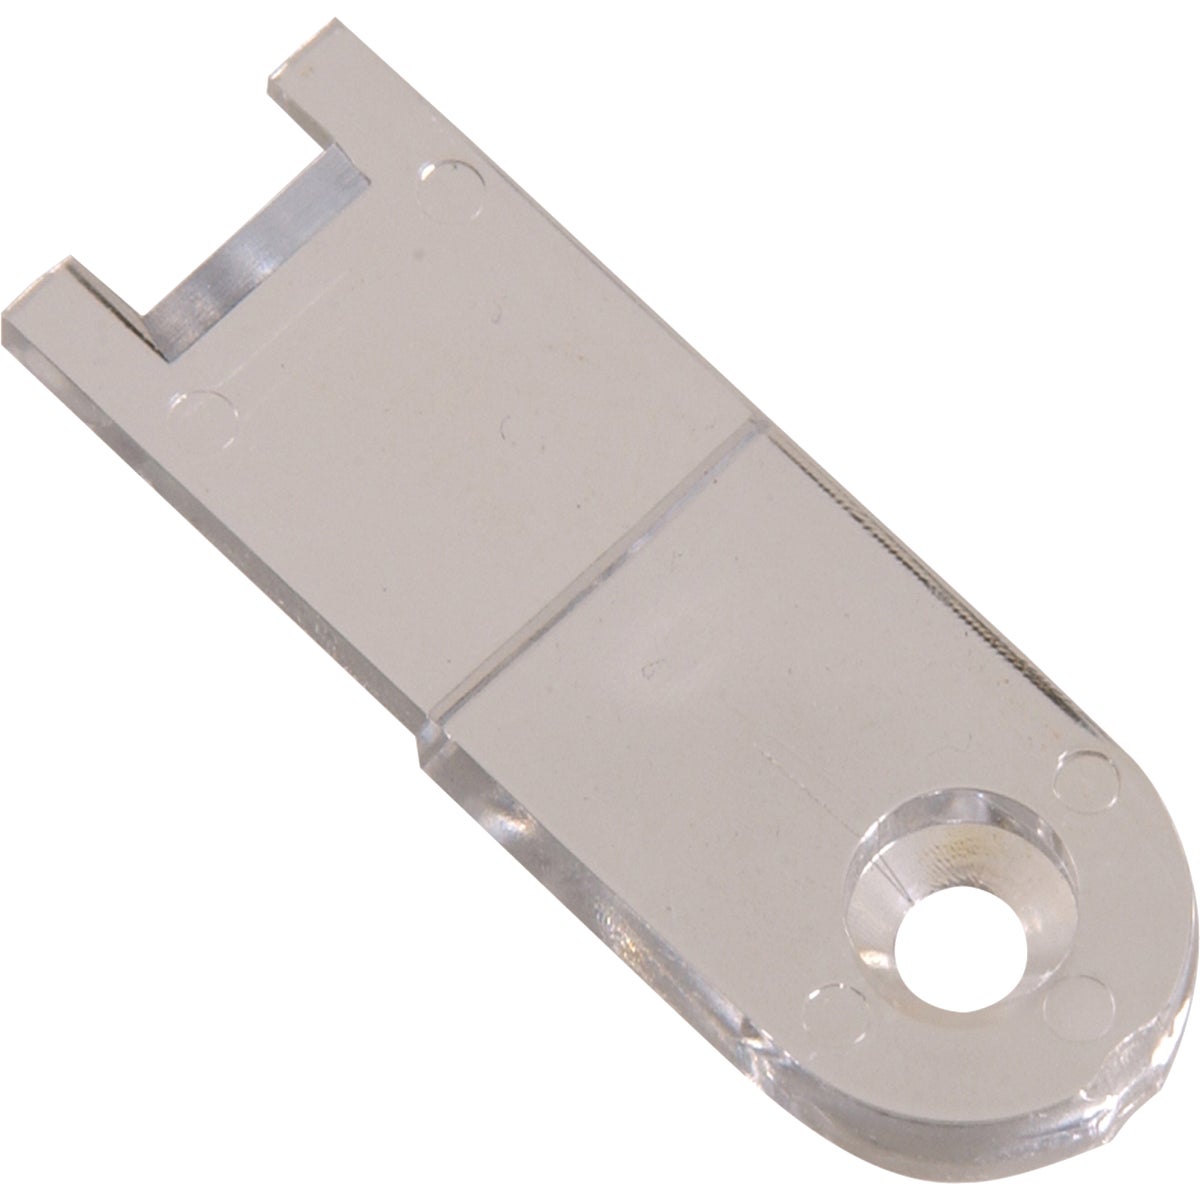 Item 514721, Clear plastic switch lock securely locks any standard light switch in the 